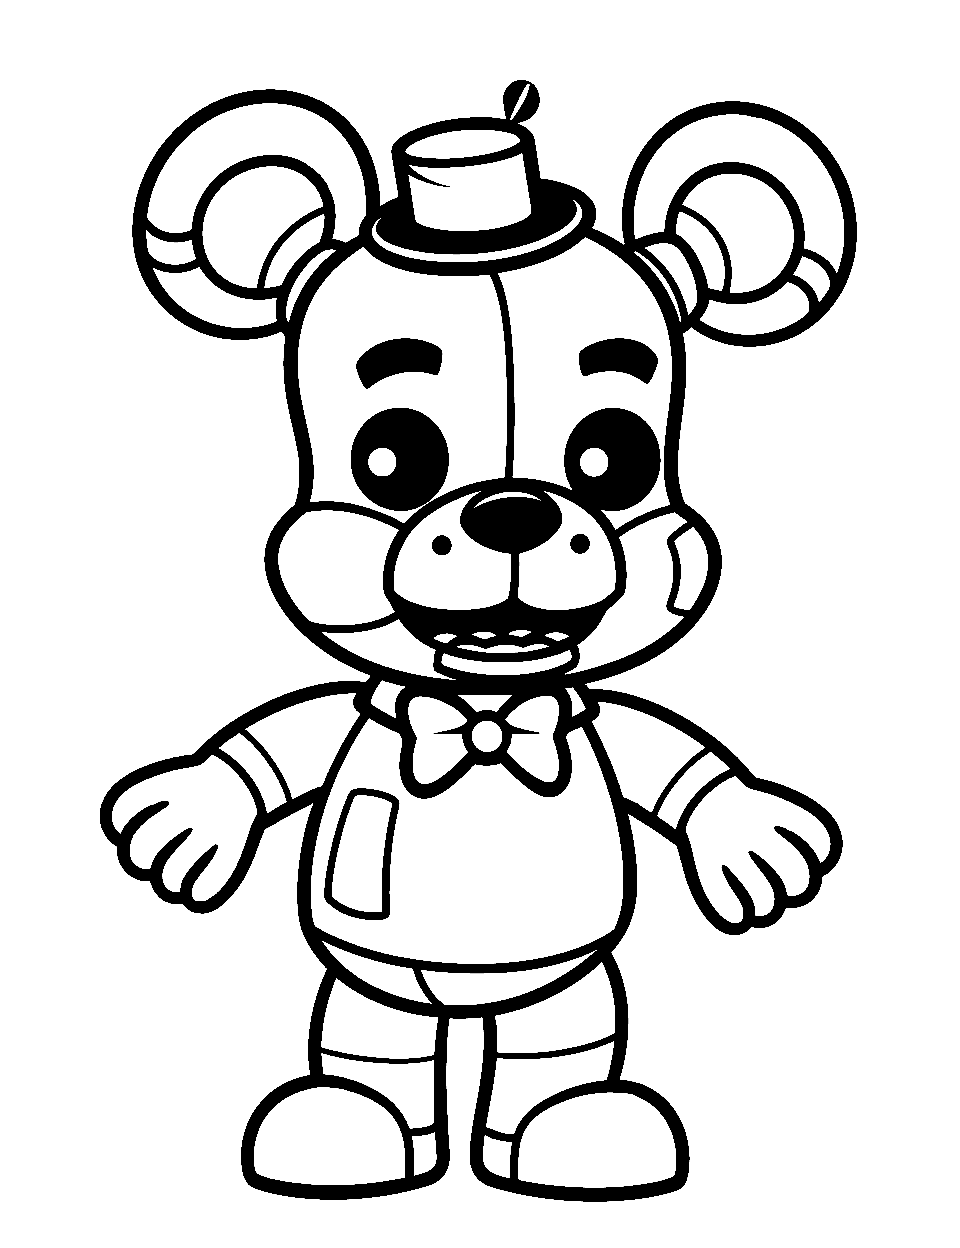 Freddy Fazbear Coloring page  Fnaf coloring pages, Bear coloring